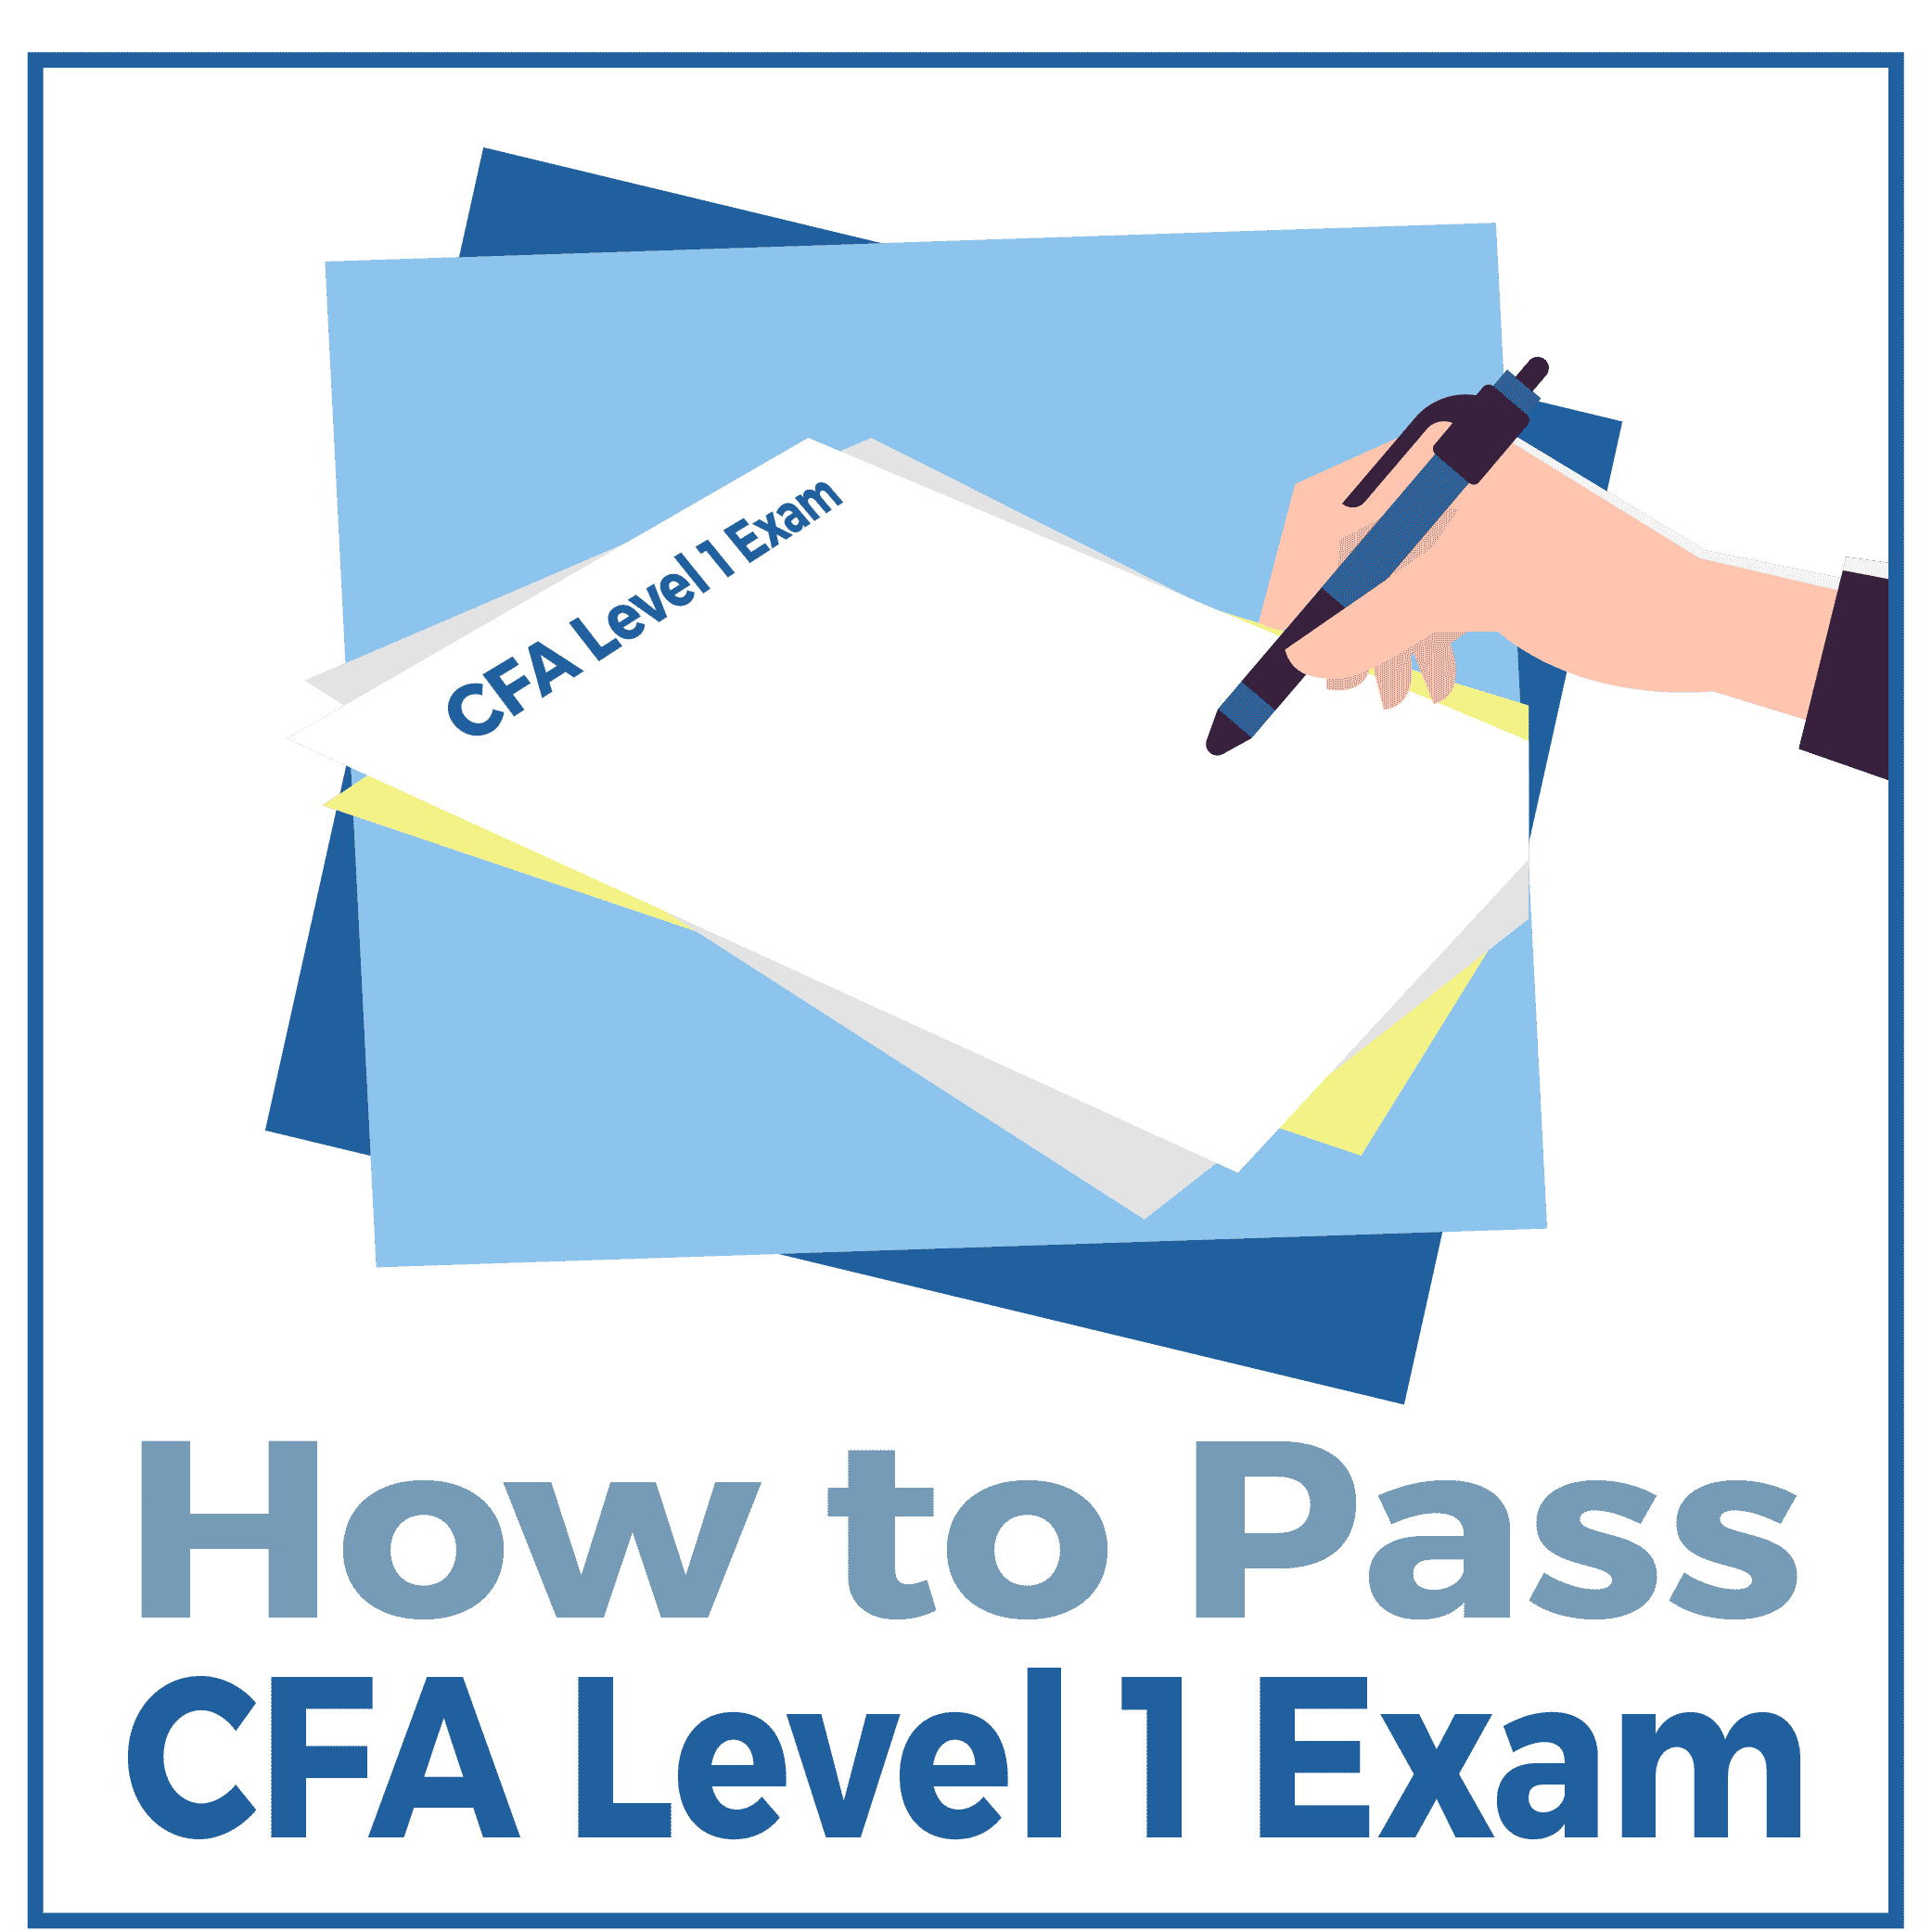 Best Series 63 exam prep; pass the first time (2023)